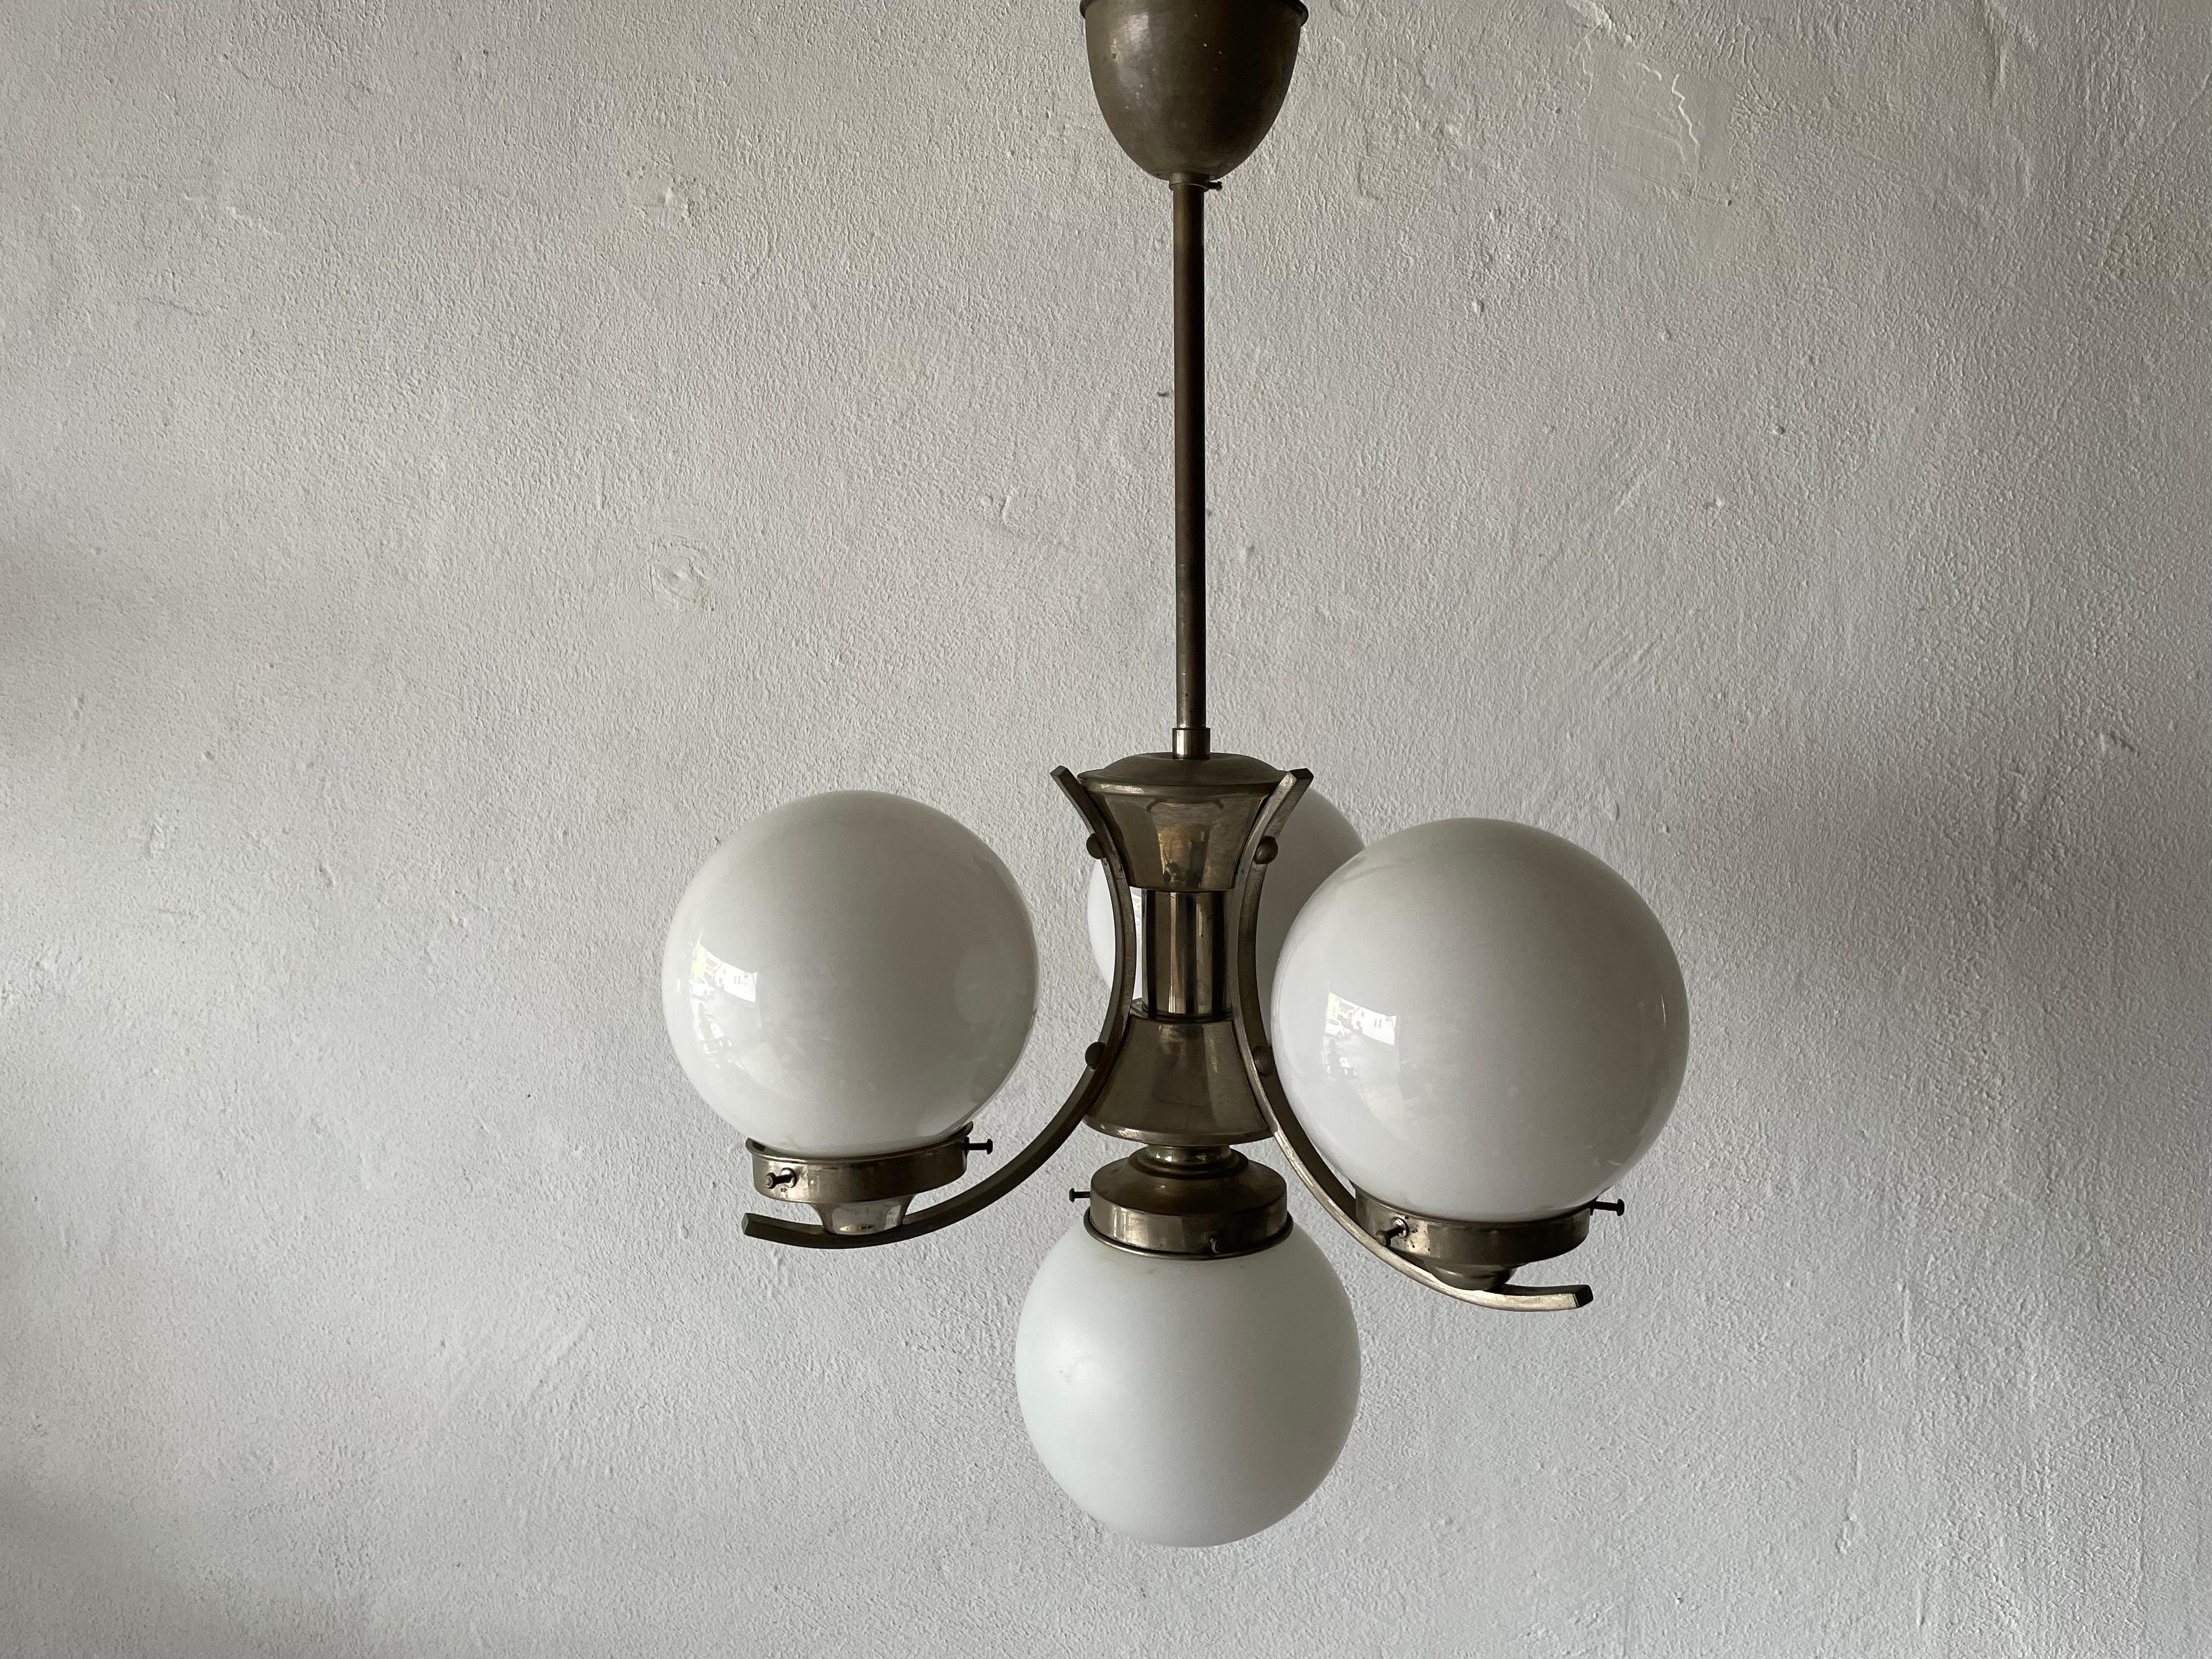 Art Deco Metallic Silver 4 Balls Ceiling Lamp, 1940s, Germany For Sale 1